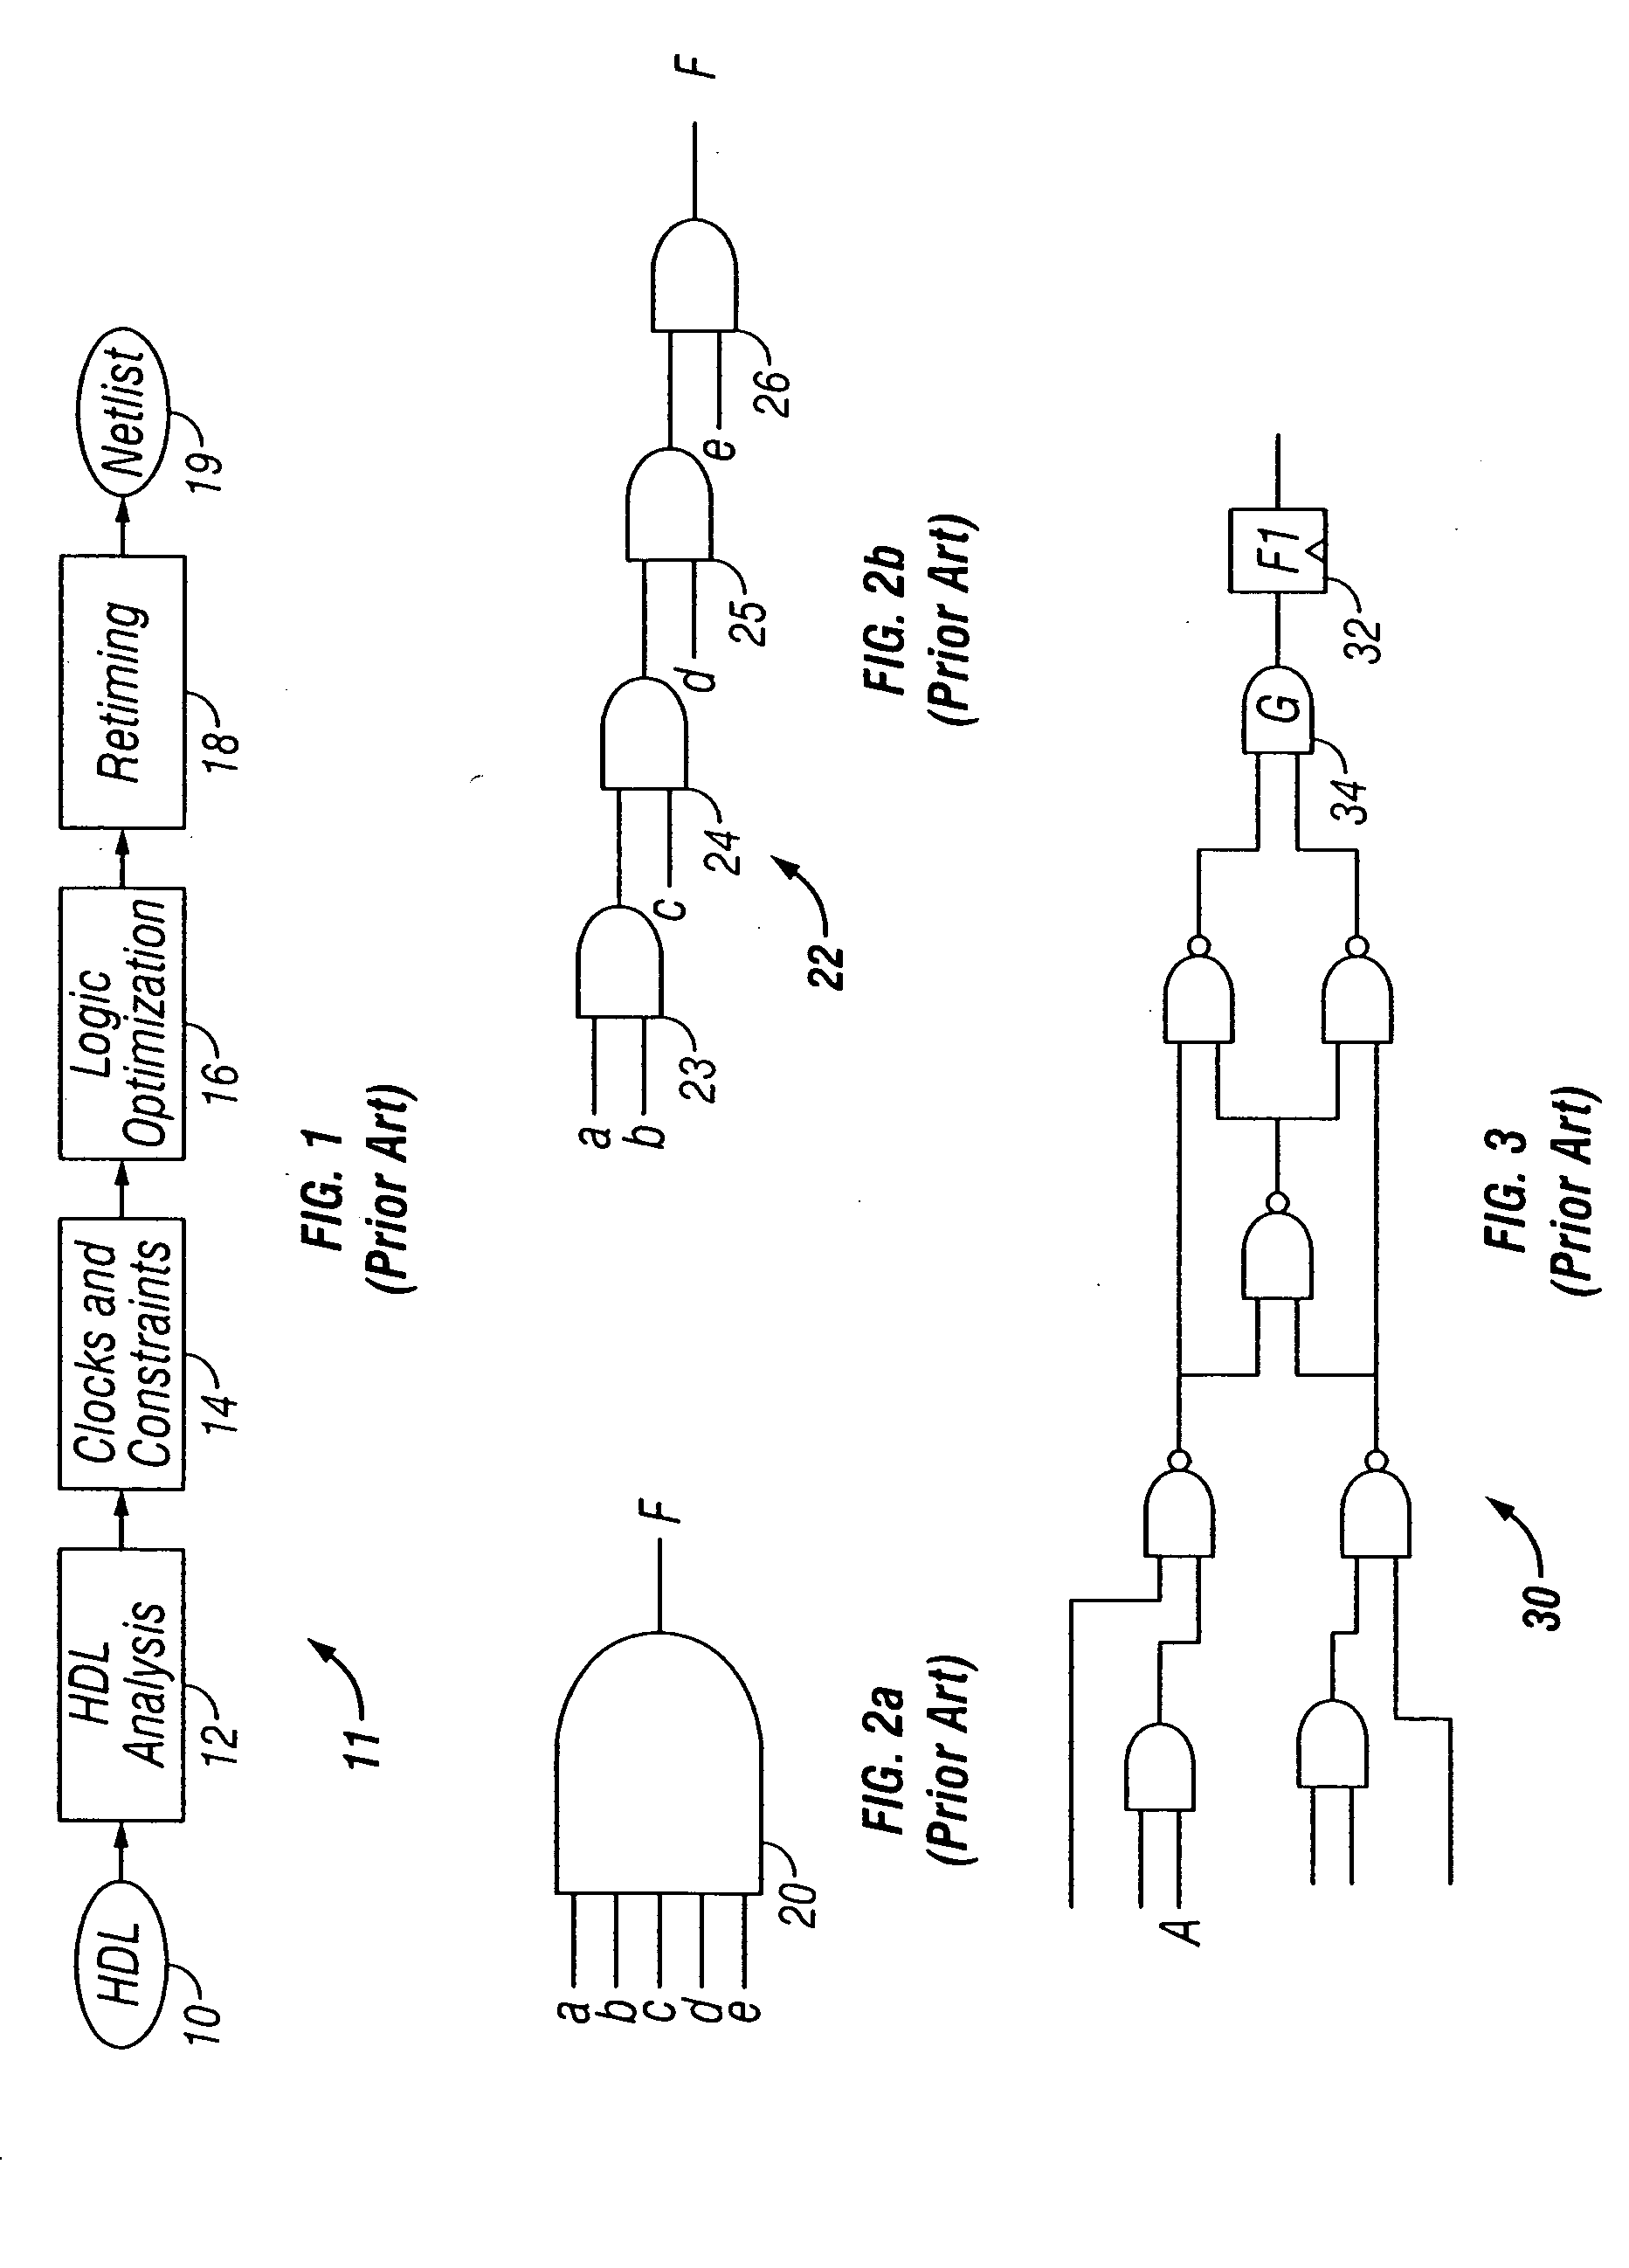 Method for generating optimized constraint systems for retimable digital designs